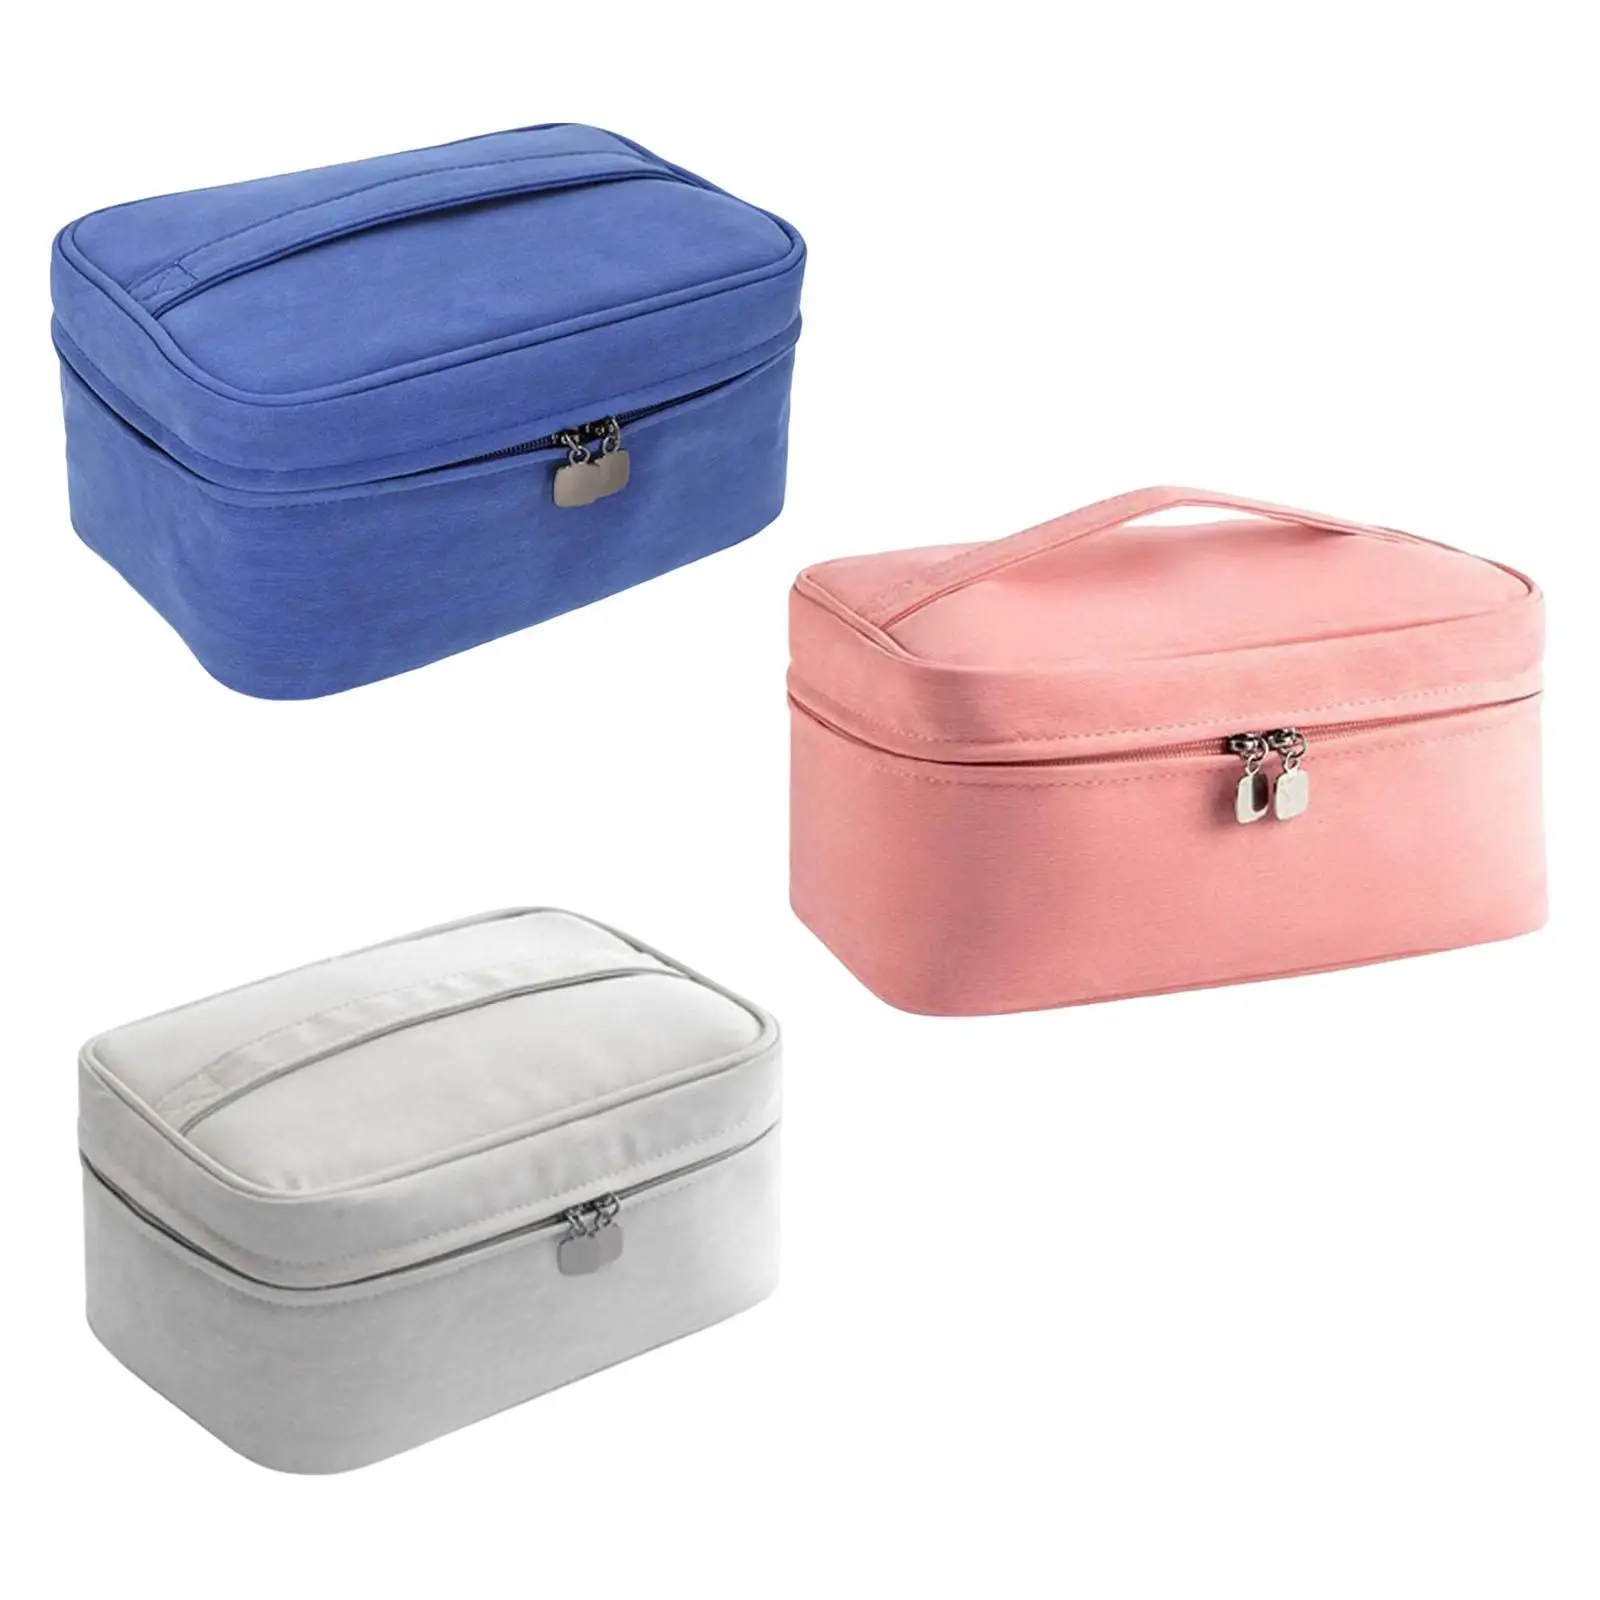 Makeup Bag with Detachable Pouch Multifunctional Cosmetic Bag for Makeup Brush Beauty Eggs Skin Care Products Lipstick Lotion